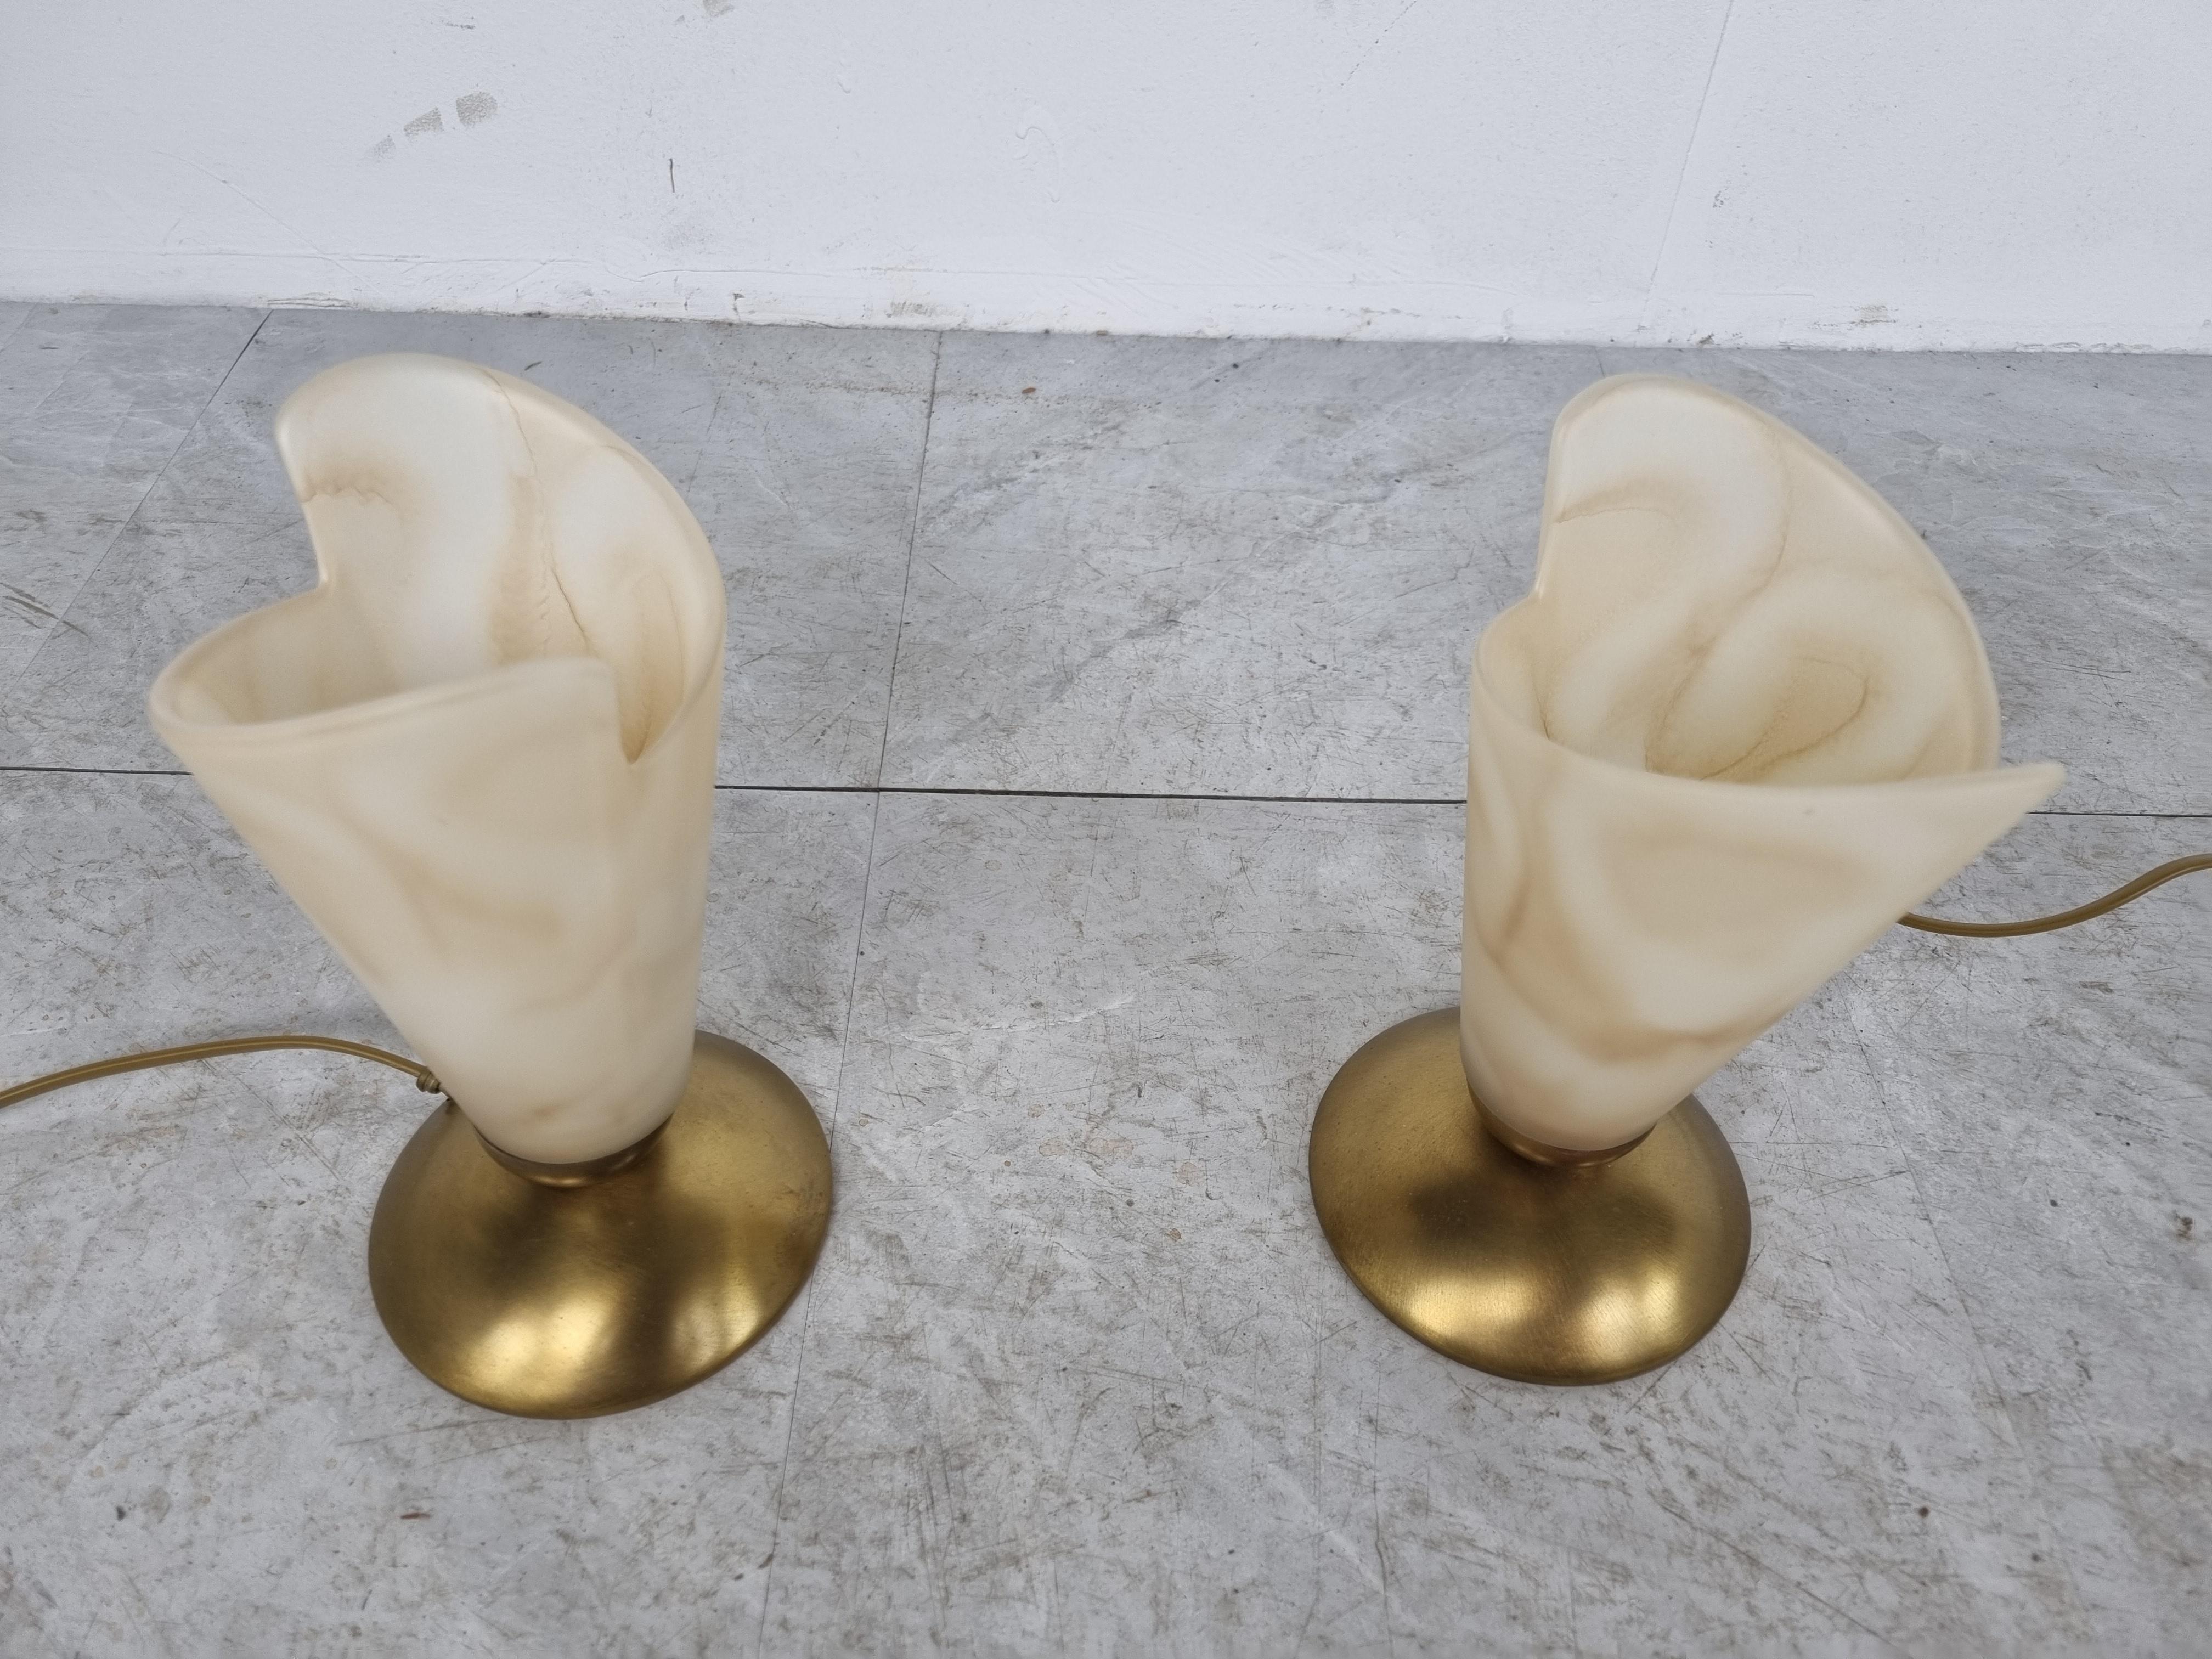 Pair of brass table lamps with alabaster shades.

The lamps emits a beautiful dimmed light.

Tested and ready for use with regular E14 light bulbs.

1980s - Belgium

Dimensions:
Height: 22cm/8.66